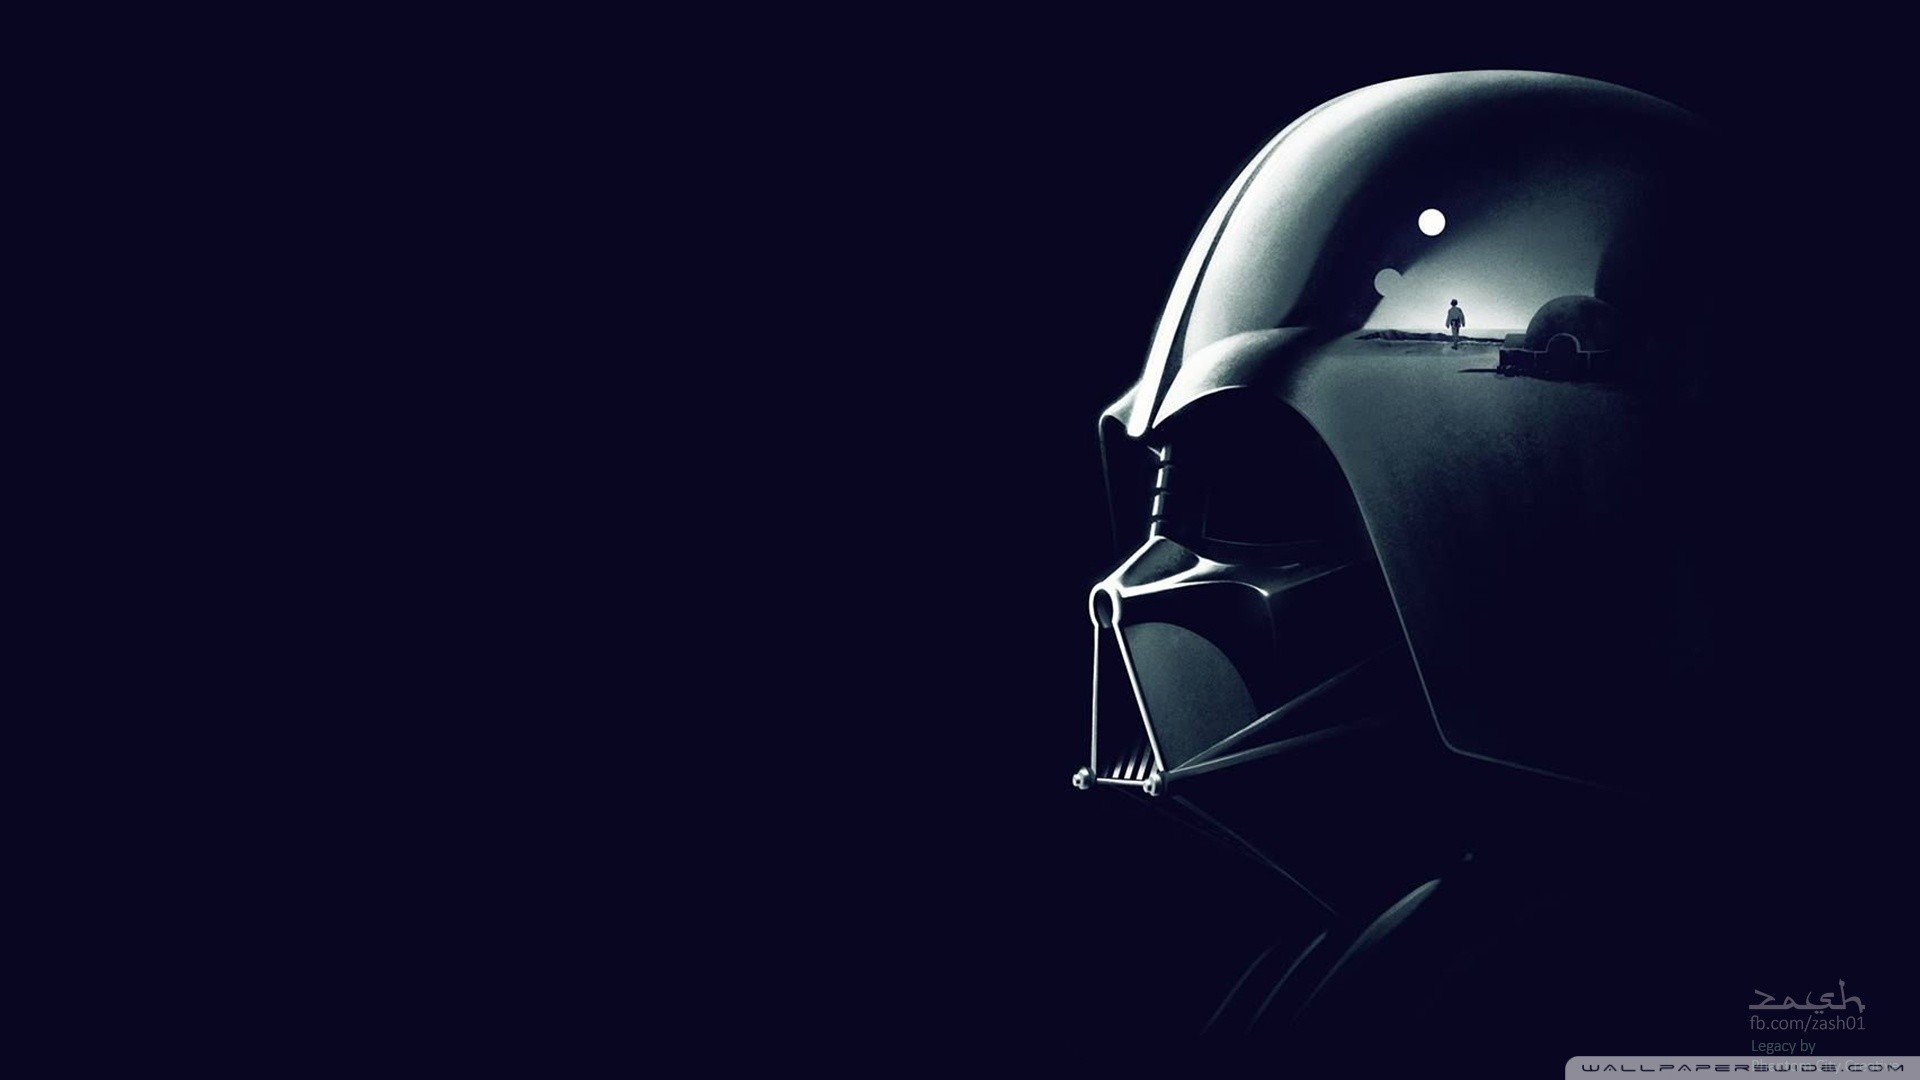 Free download Star Wars HD Wallpapers 1920x1080 62 images [1920x1080